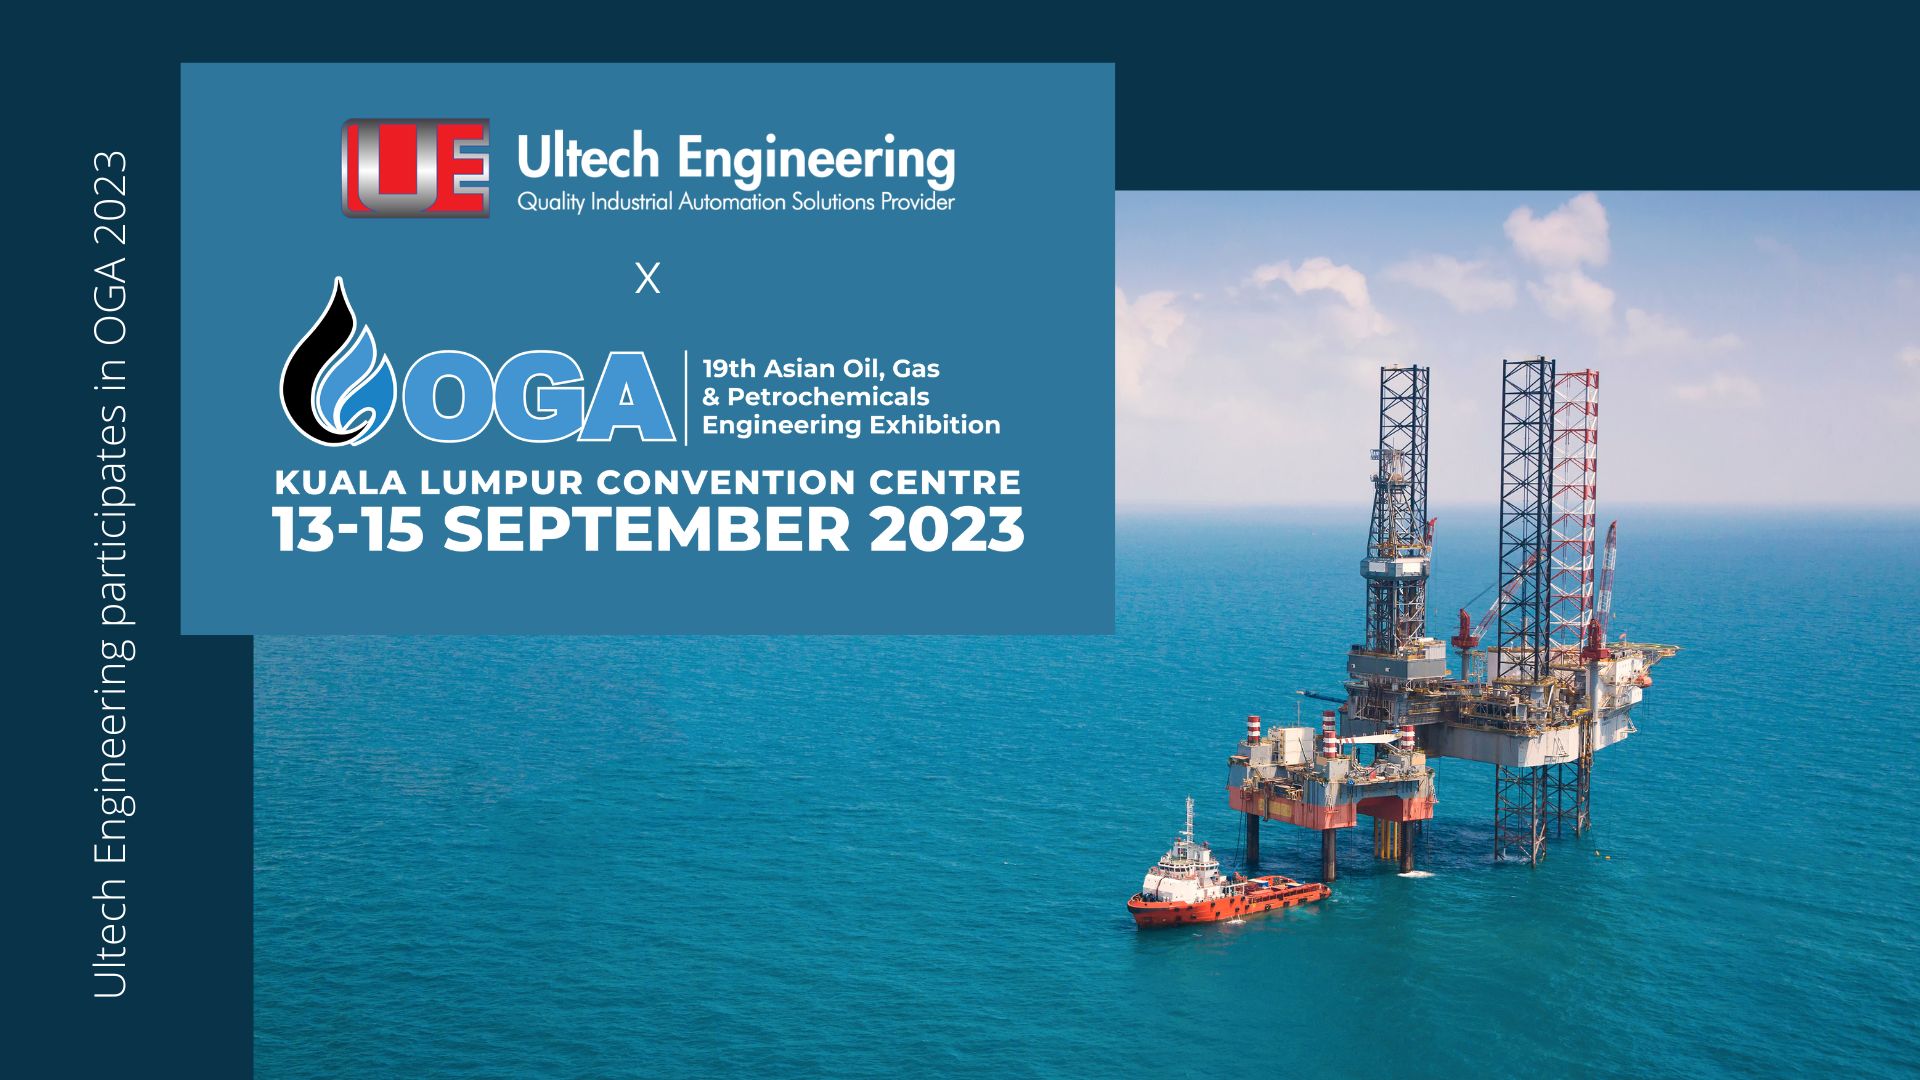 Join us at the Largest Oil and Gas Conference of the Year! Ultech Engineering